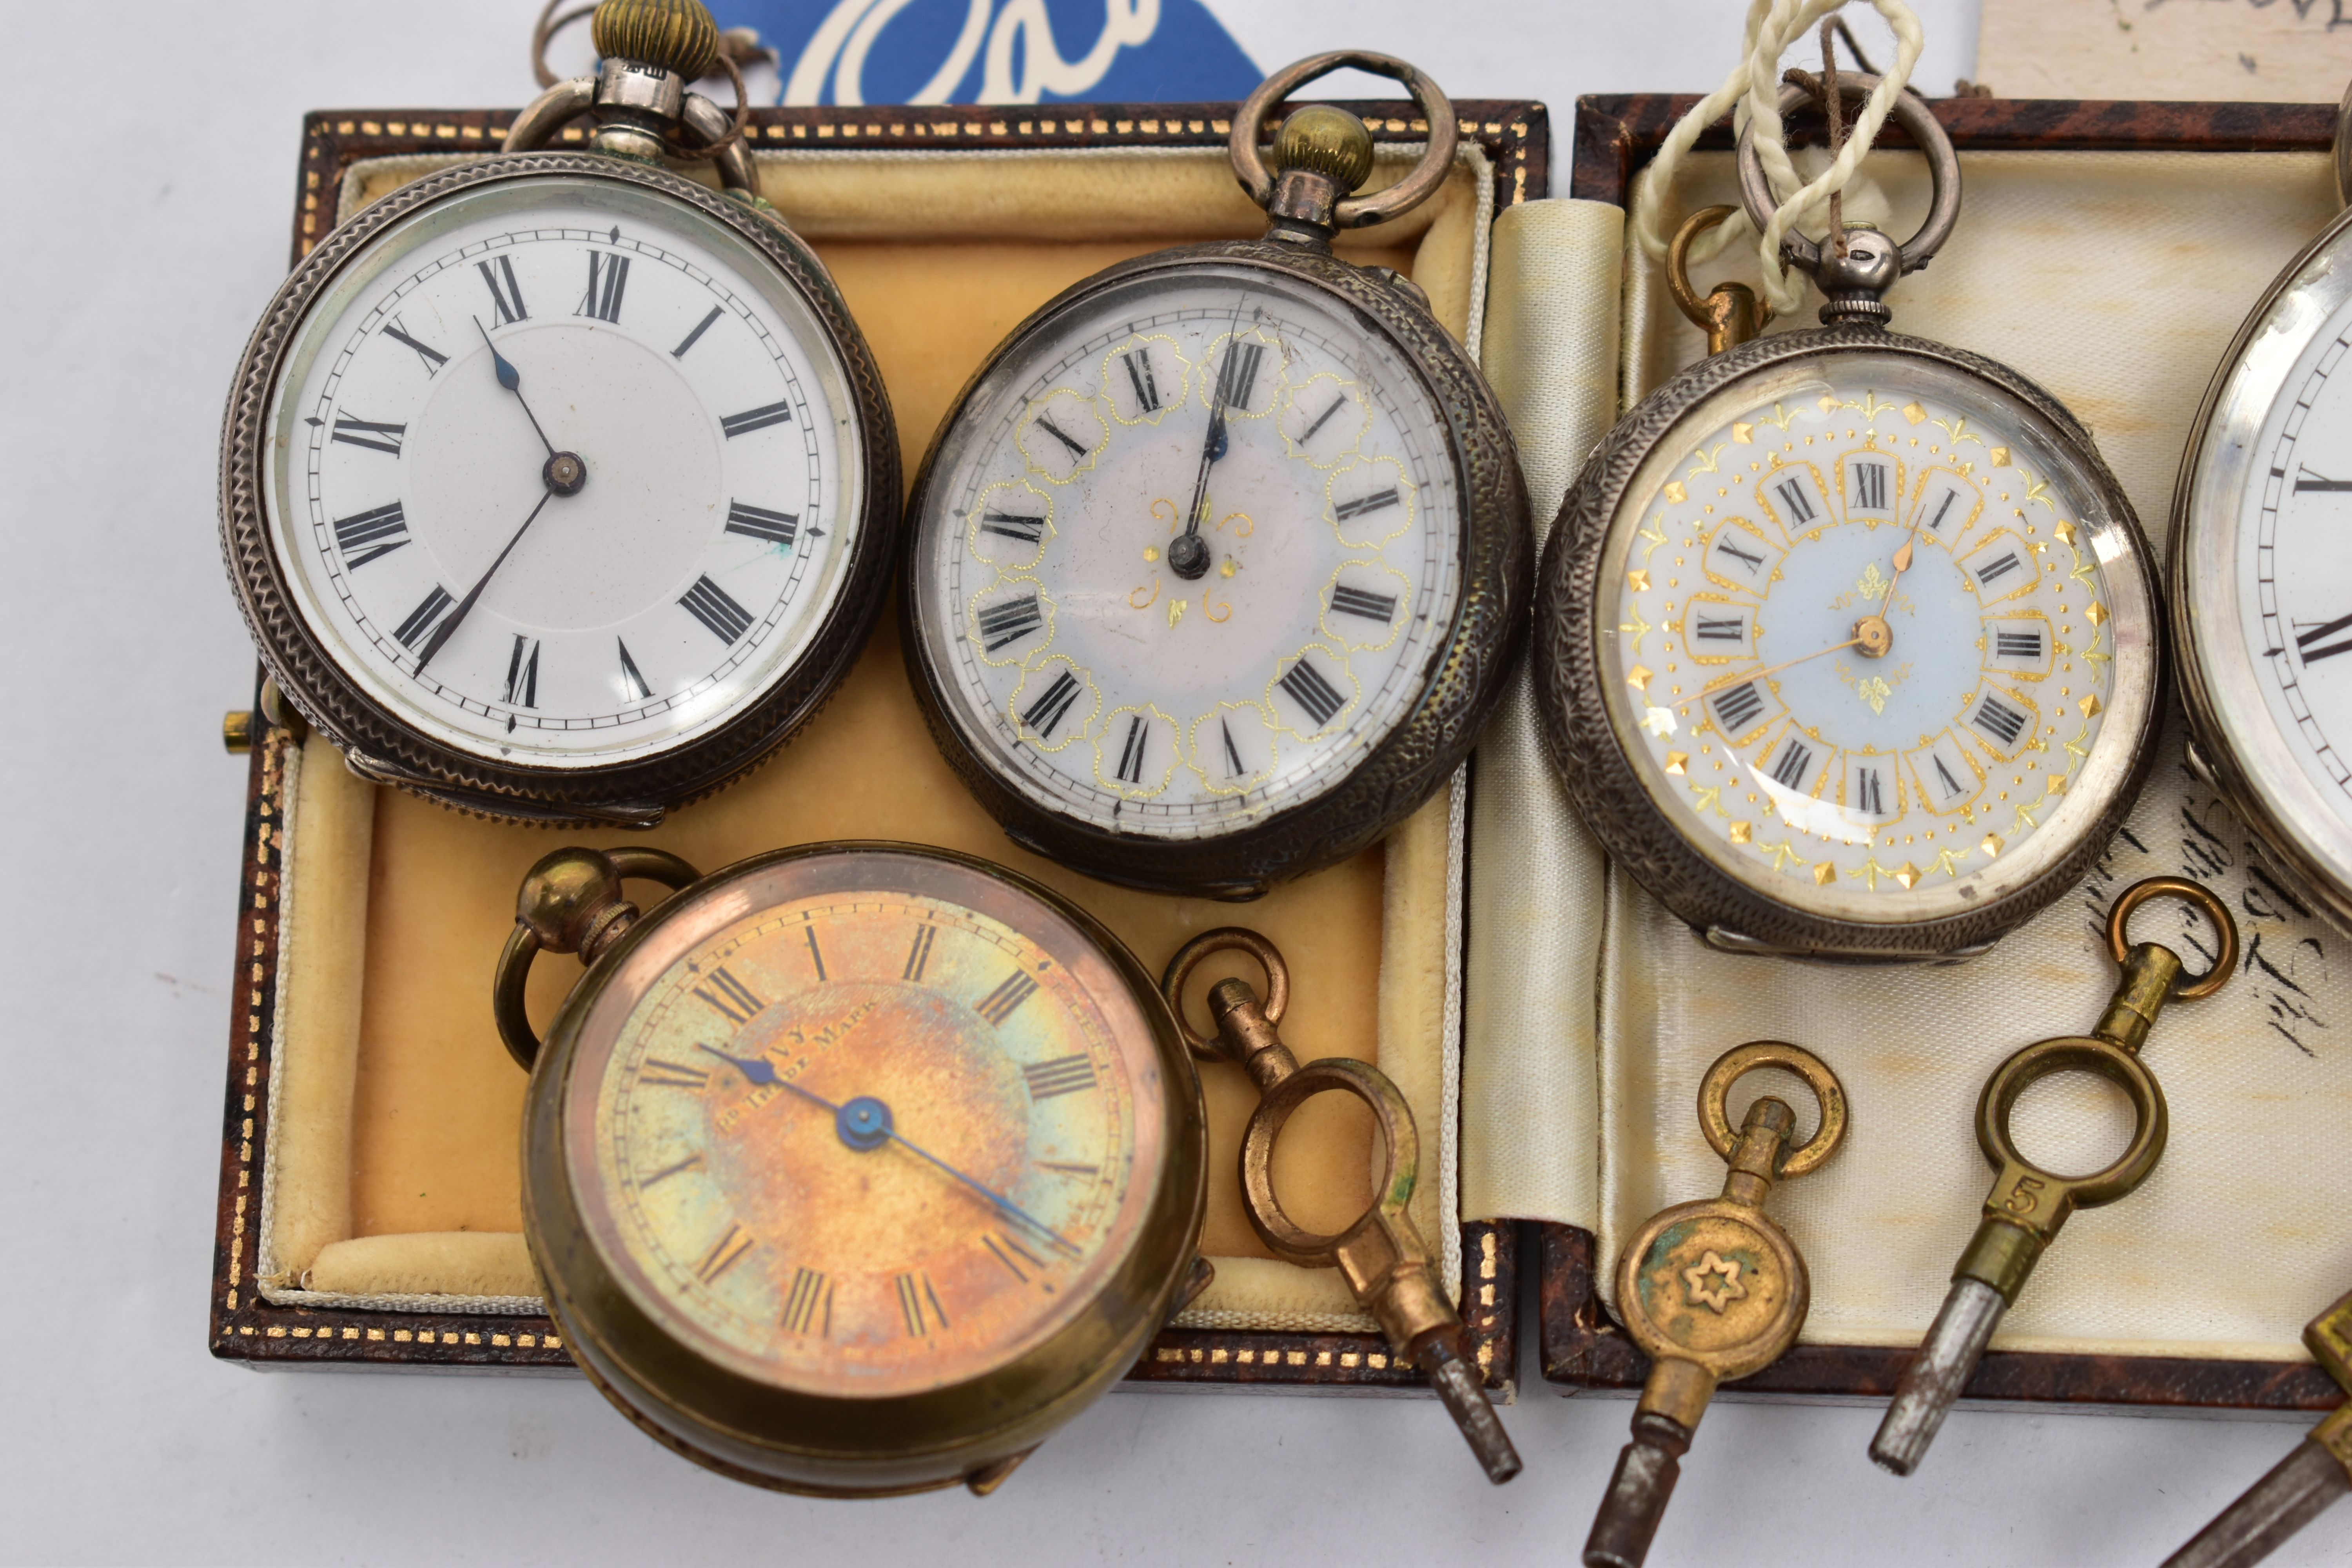 FIVE OPEN FACE POCKET WATCHES, the first a silver cased ladies pocket watch, hand wound movement, - Image 3 of 5